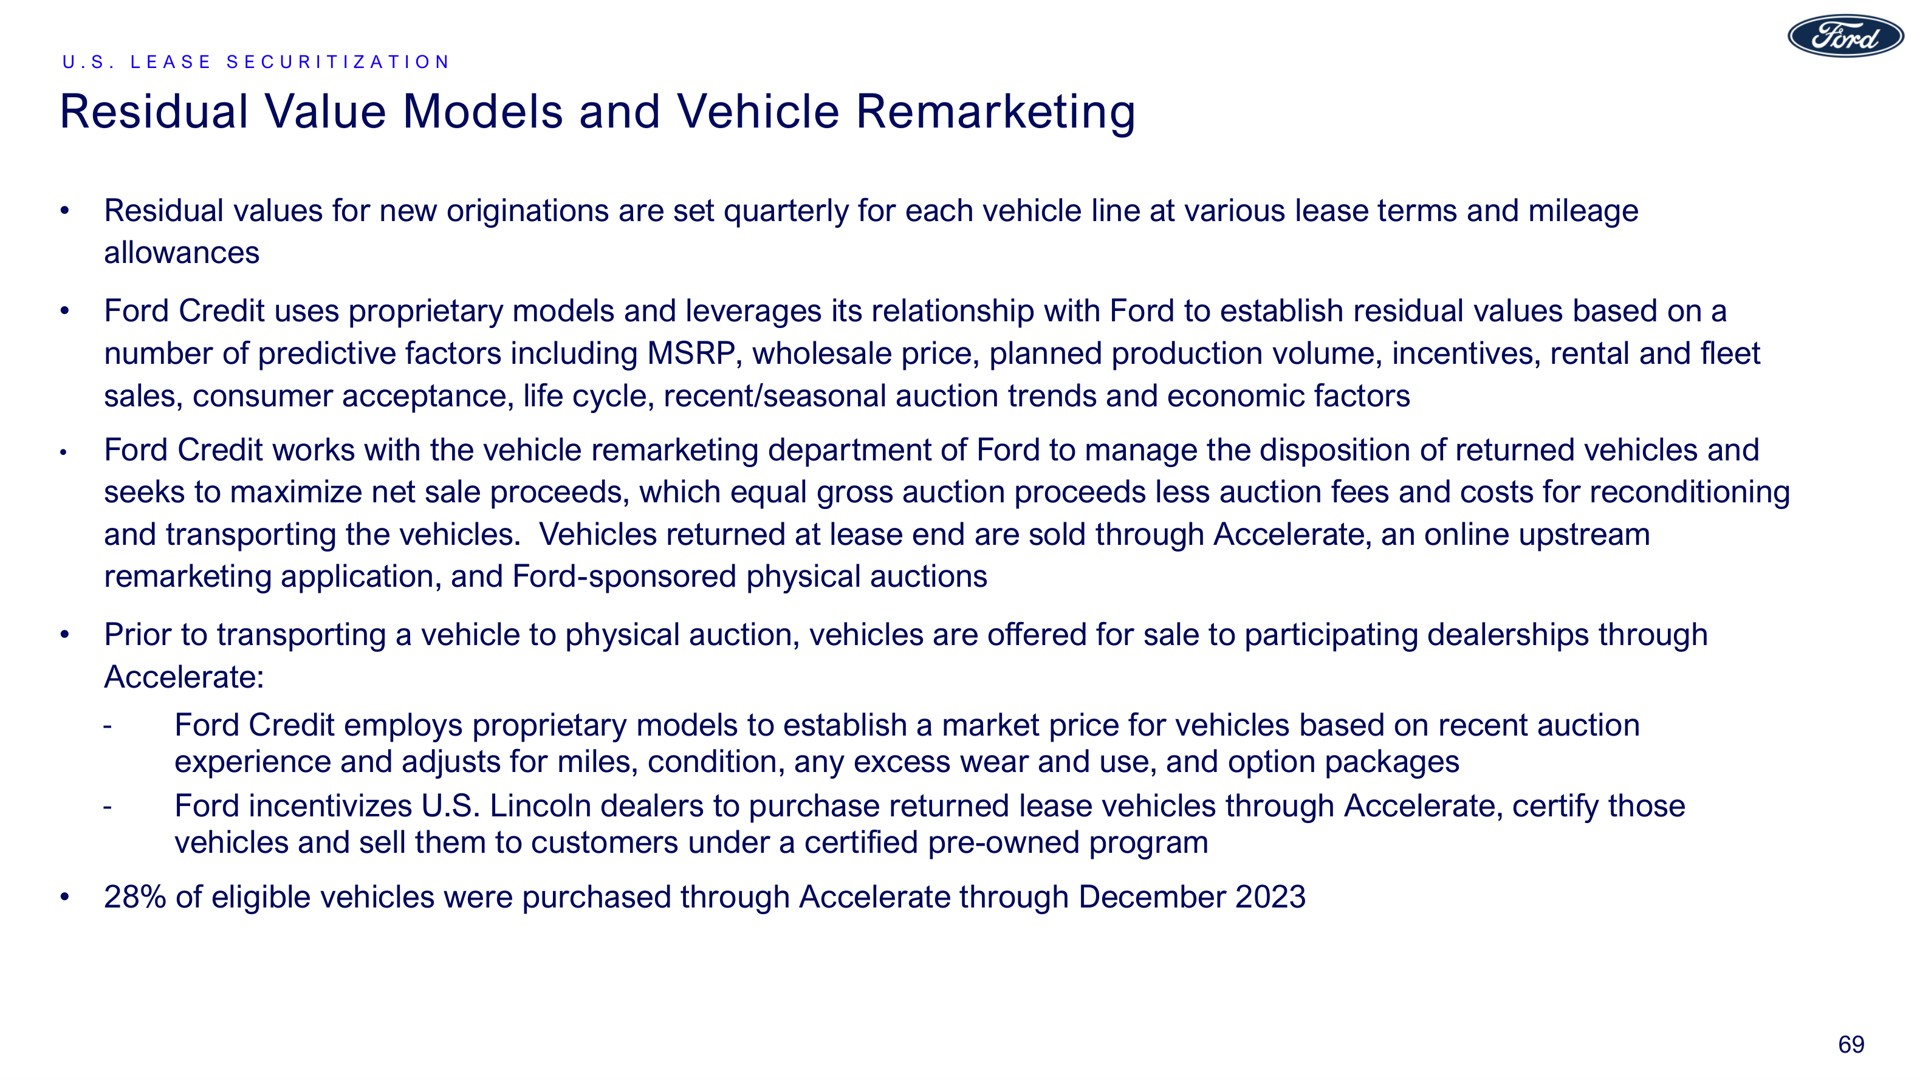 residual value models and vehicle residual values for new originations are set quarterly for each vehicle line at various lease terms and mileage allowances ford credit uses proprietary models and leverages its relationship with ford to establish residual values based on a number of predictive factors including wholesale price planned production volume incentives rental and fleet sales consumer acceptance life cycle recent seasonal auction trends and economic factors ford credit works with the vehicle department of ford to manage the disposition of returned vehicles and seeks to maximize net sale proceeds which equal gross auction proceeds less auction fees and costs for reconditioning and transporting the vehicles vehicles returned at lease end are sold through accelerate an upstream application and ford sponsored physical auctions prior to transporting a vehicle to physical auction vehicles are offered for sale to participating dealerships through accelerate ford credit employs proprietary models to establish a market price for vehicles based on recent auction experience and adjusts for miles condition any excess wear and use and option packages ford dealers to purchase returned lease vehicles through accelerate certify those vehicles and sell them to customers under a certified owned program of eligible vehicles were purchased through accelerate through | Ford